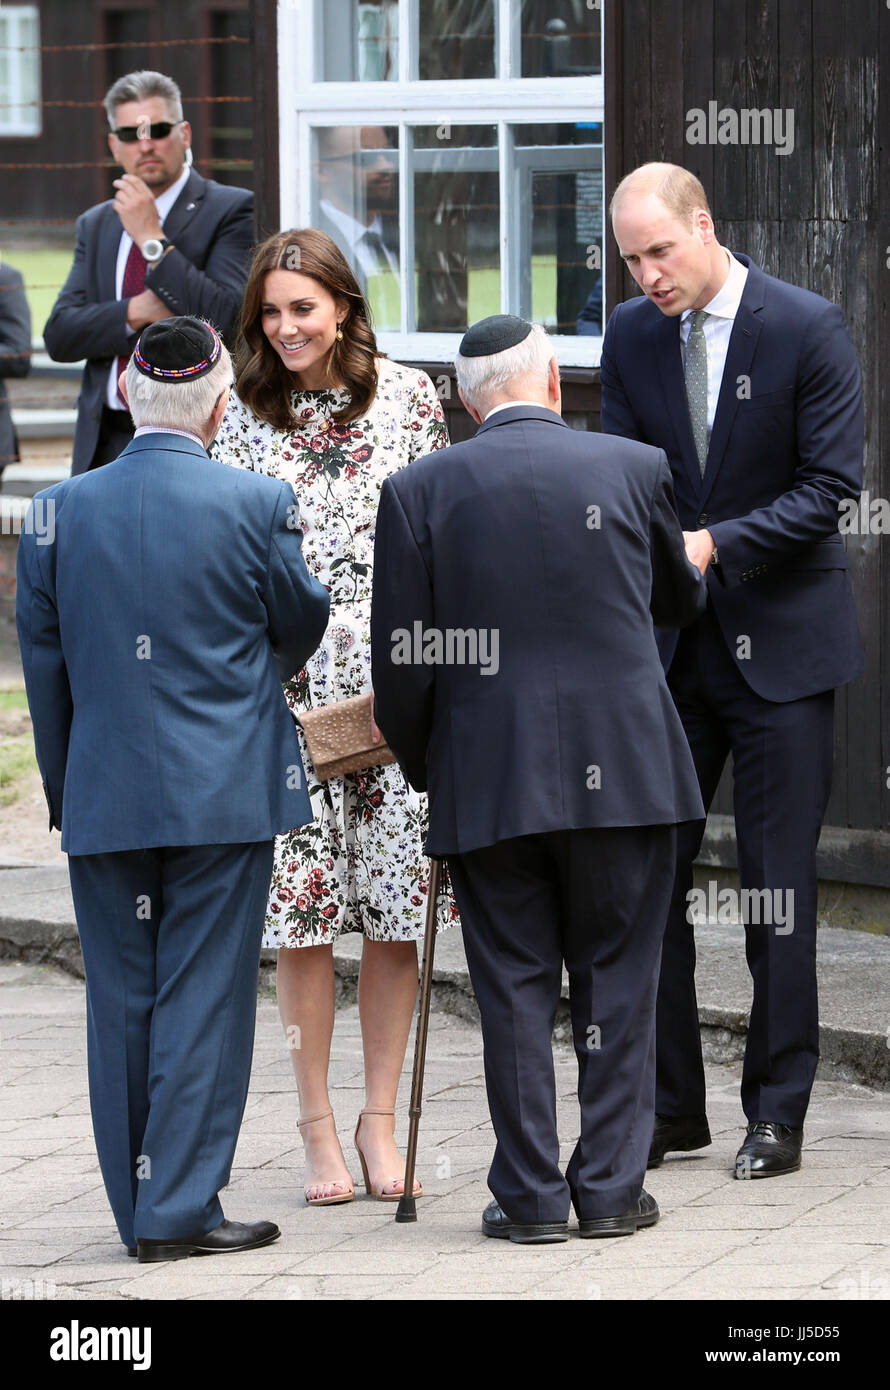 The Duke and Duchess of Cambridge meet survivors during their visit to the former Nazi concentration camp at Stutthof, near Gdansk, on the second day of their three-day tour of Poland. Stock Photo